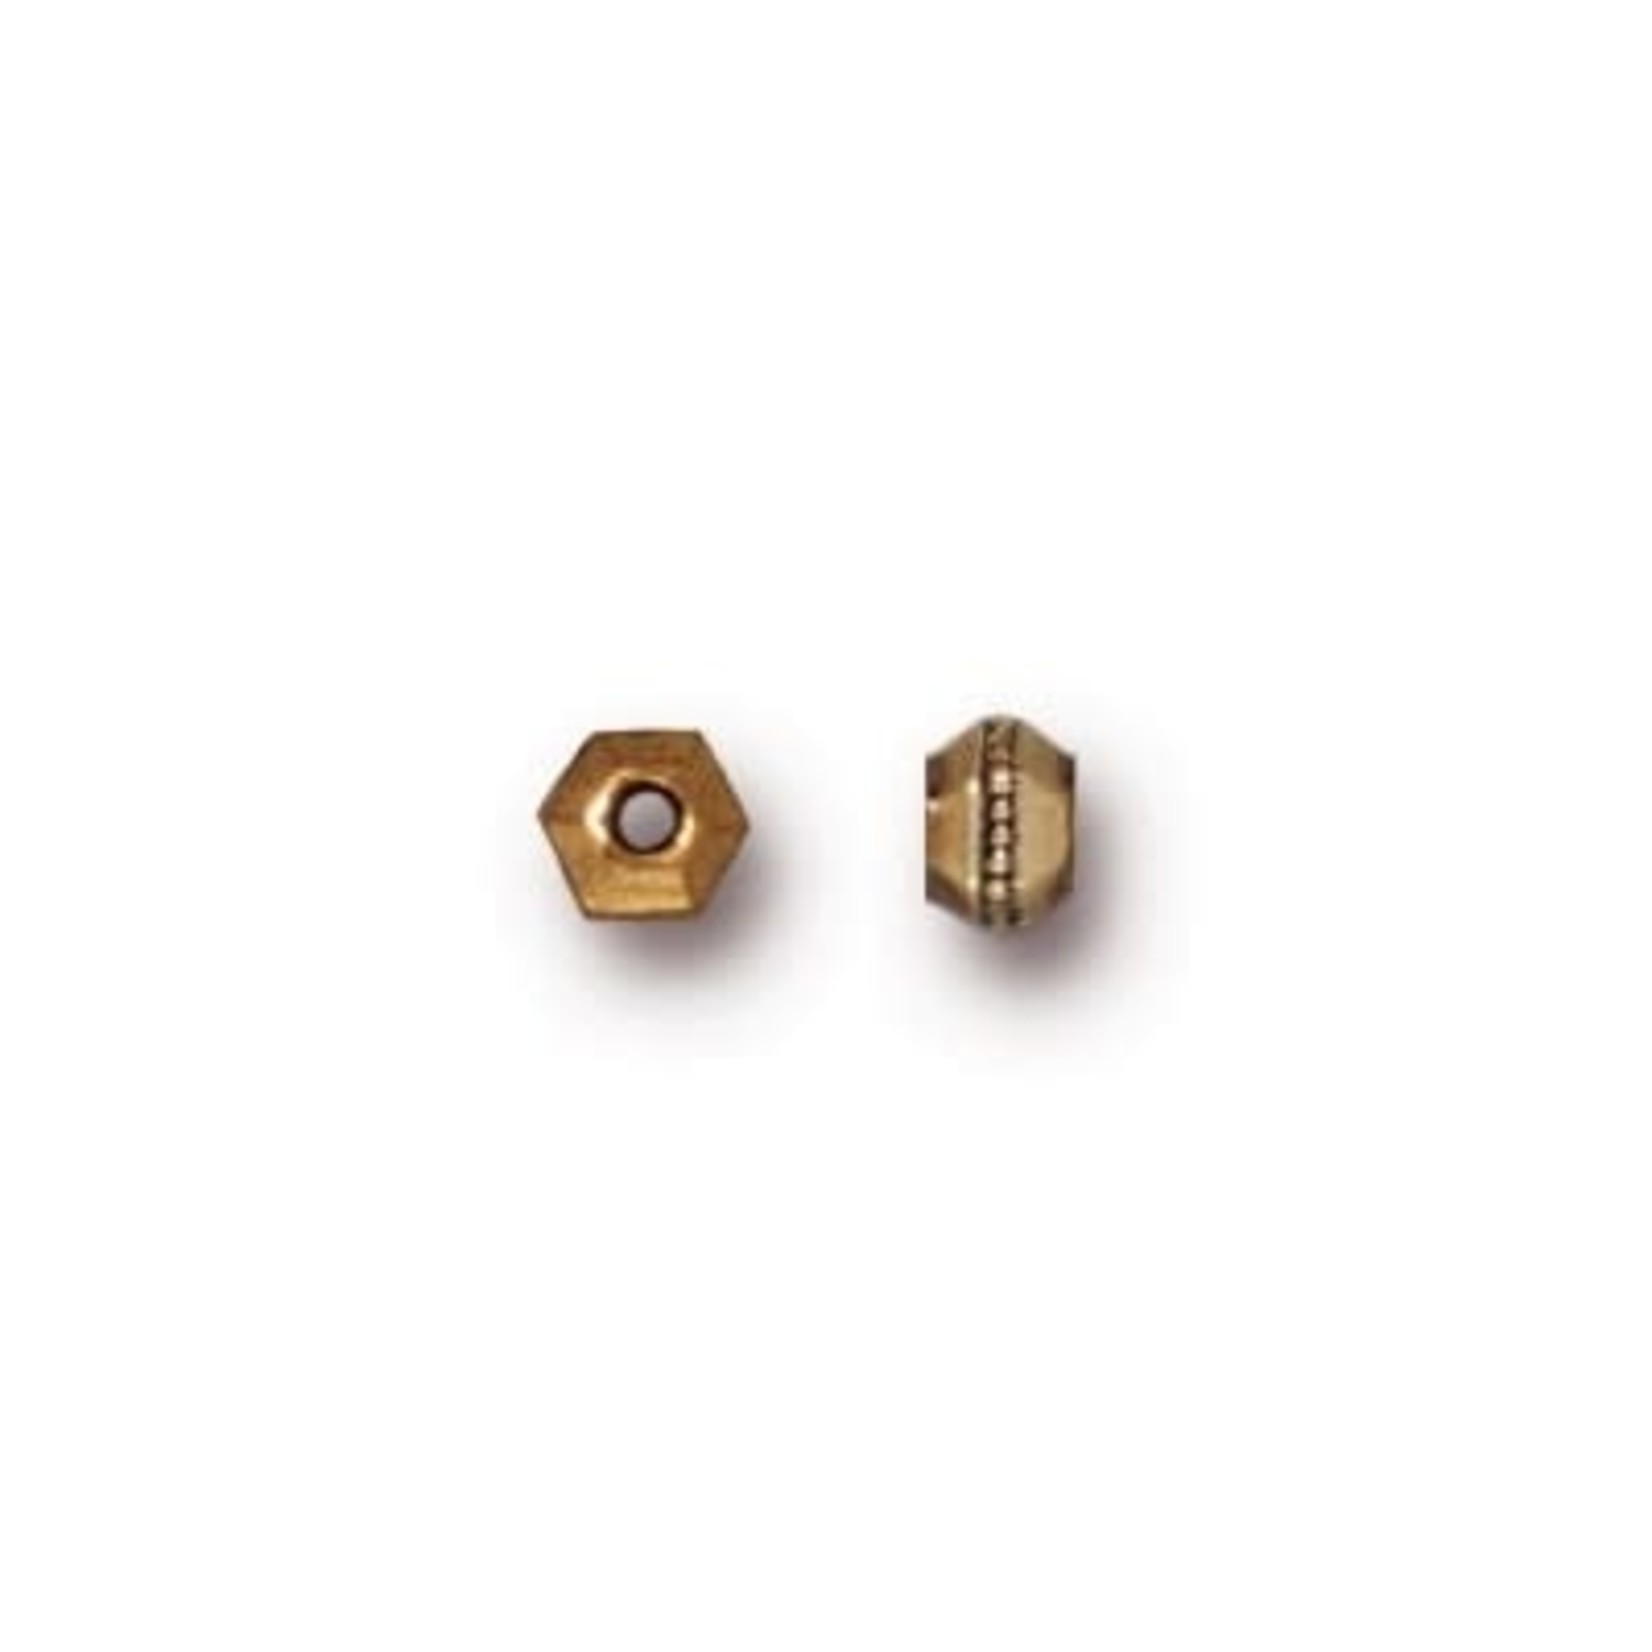 Faceted 3mm Hexagon Spacer Bead Antique Gold Plated - 20 pieces